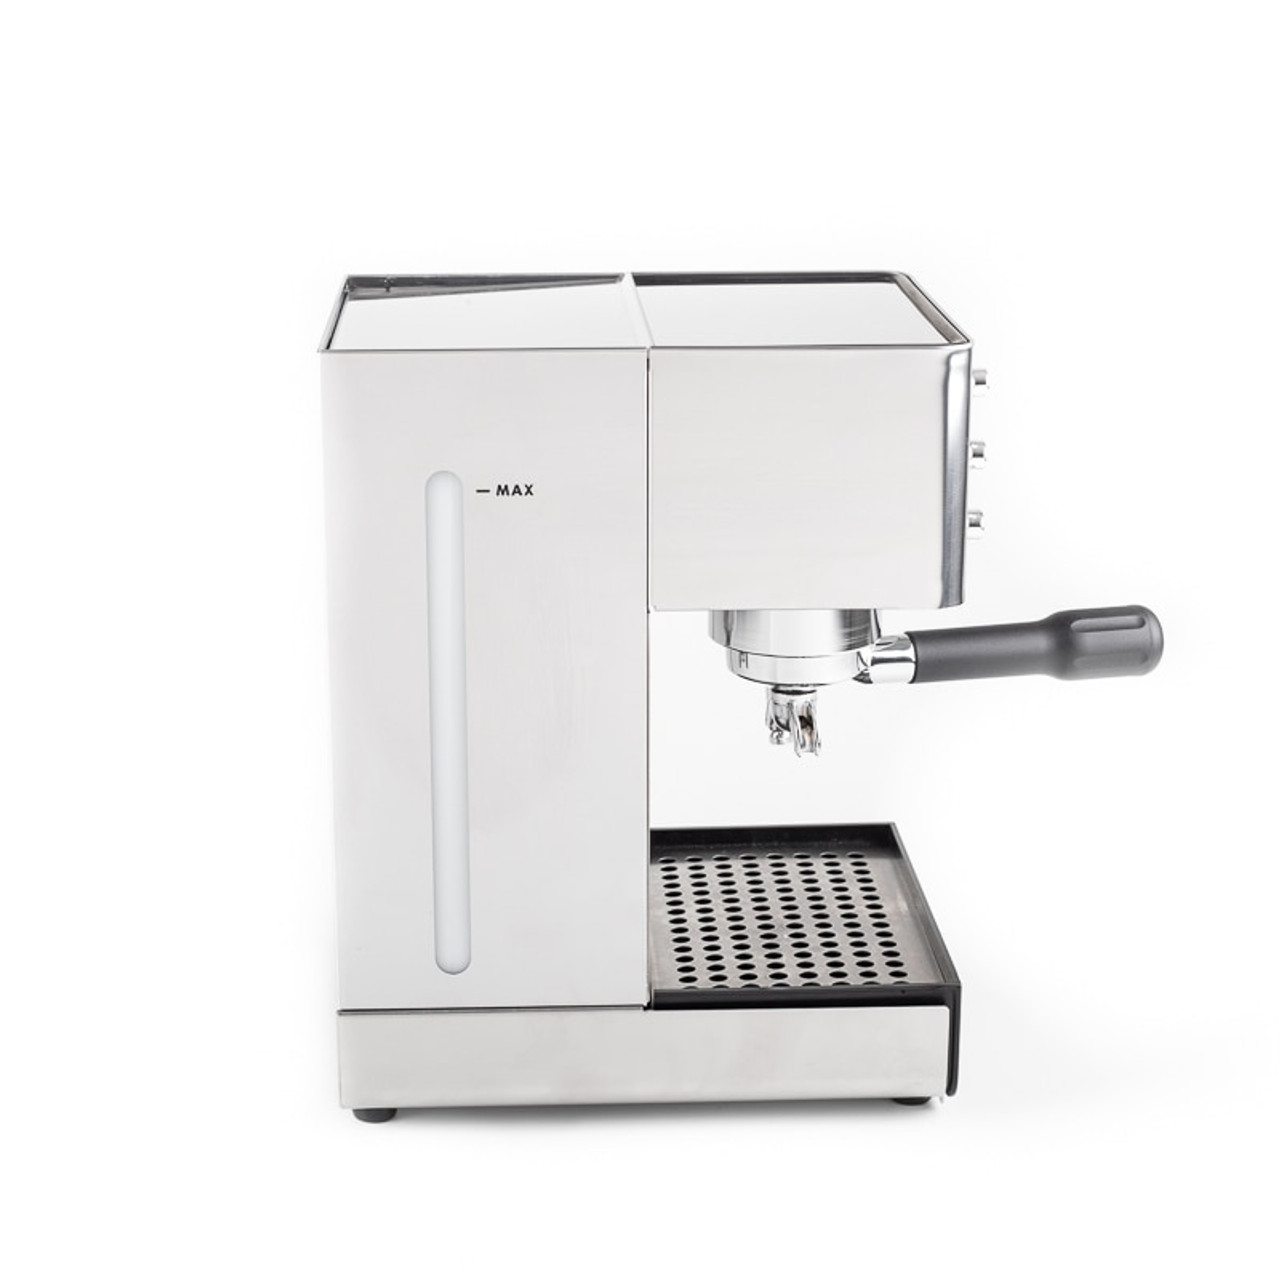 Lelit Line Anna Coffee Machine Pl41qe Shipping starting from